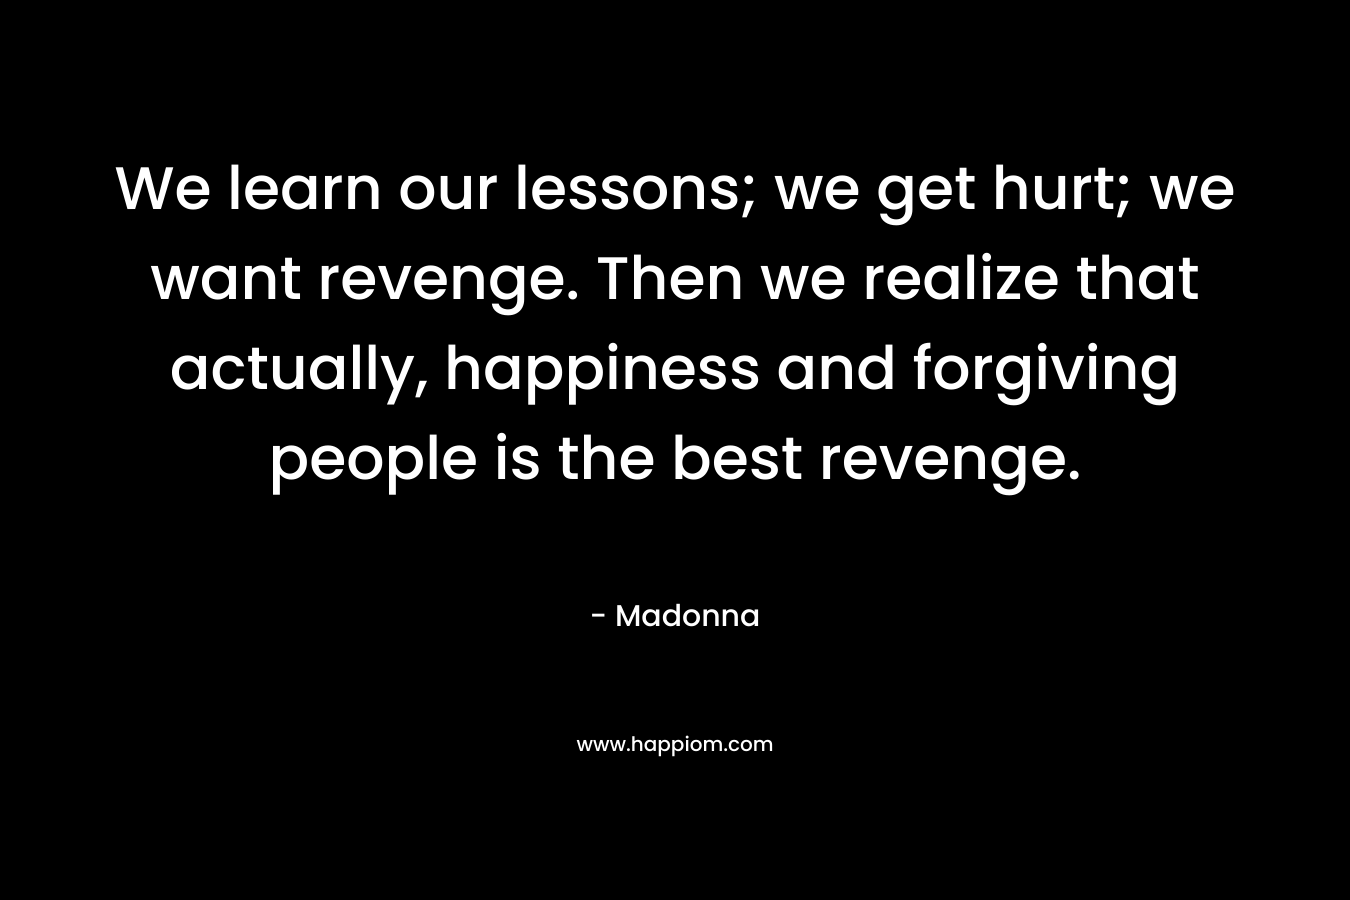 We learn our lessons; we get hurt; we want revenge. Then we realize that actually, happiness and forgiving people is the best revenge. – Madonna